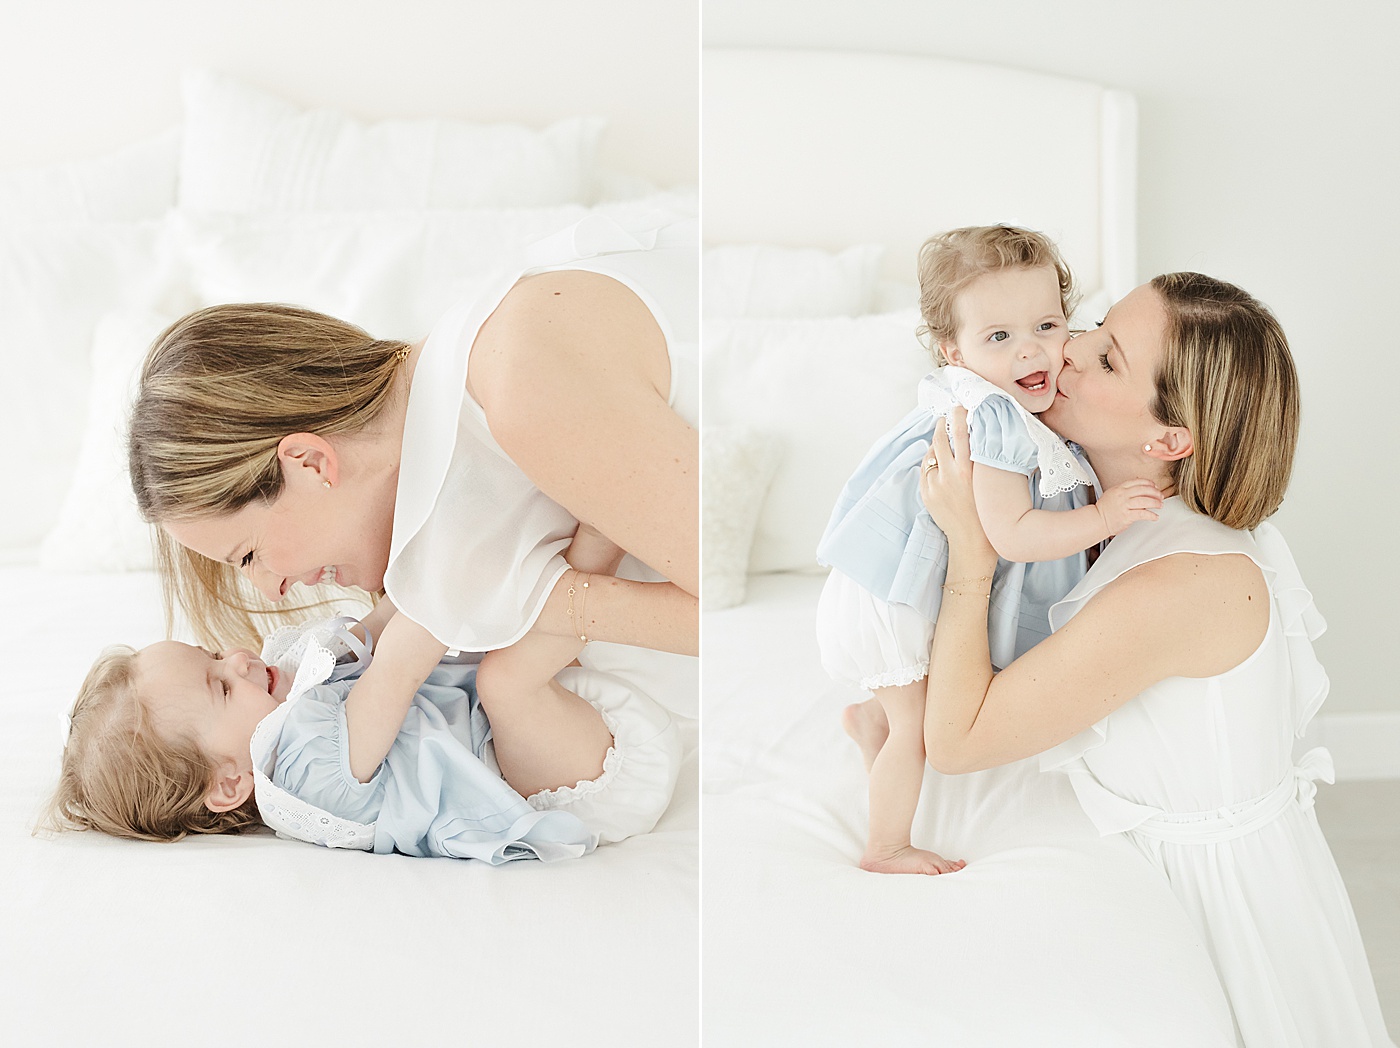 Mom with daughter during first birthday photoshoot | Kristin Wood Photography